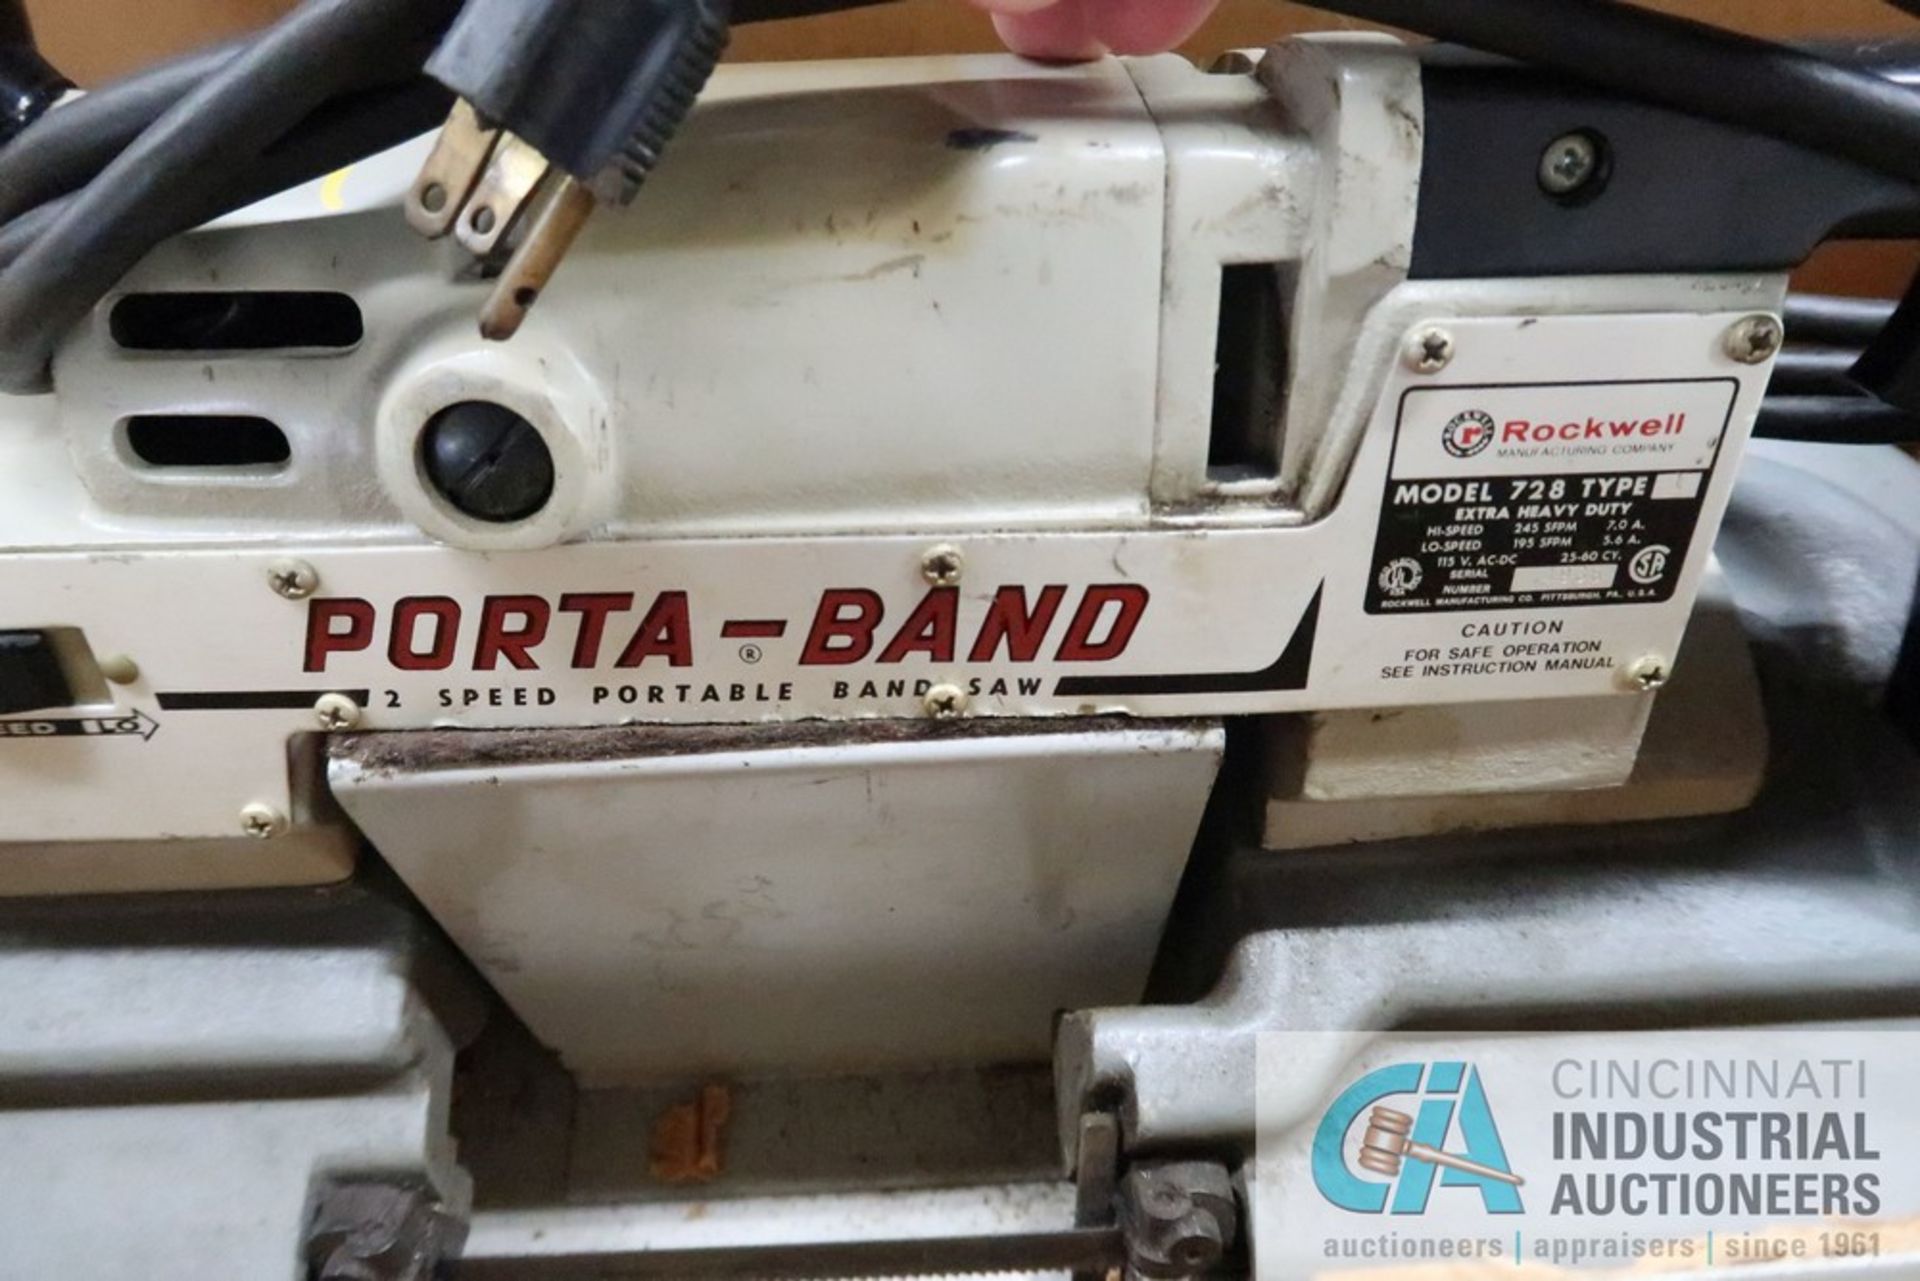 ROCKWELL MODEL 728 ELECTRIC PORTA-BAND BAND SAW - Image 2 of 3